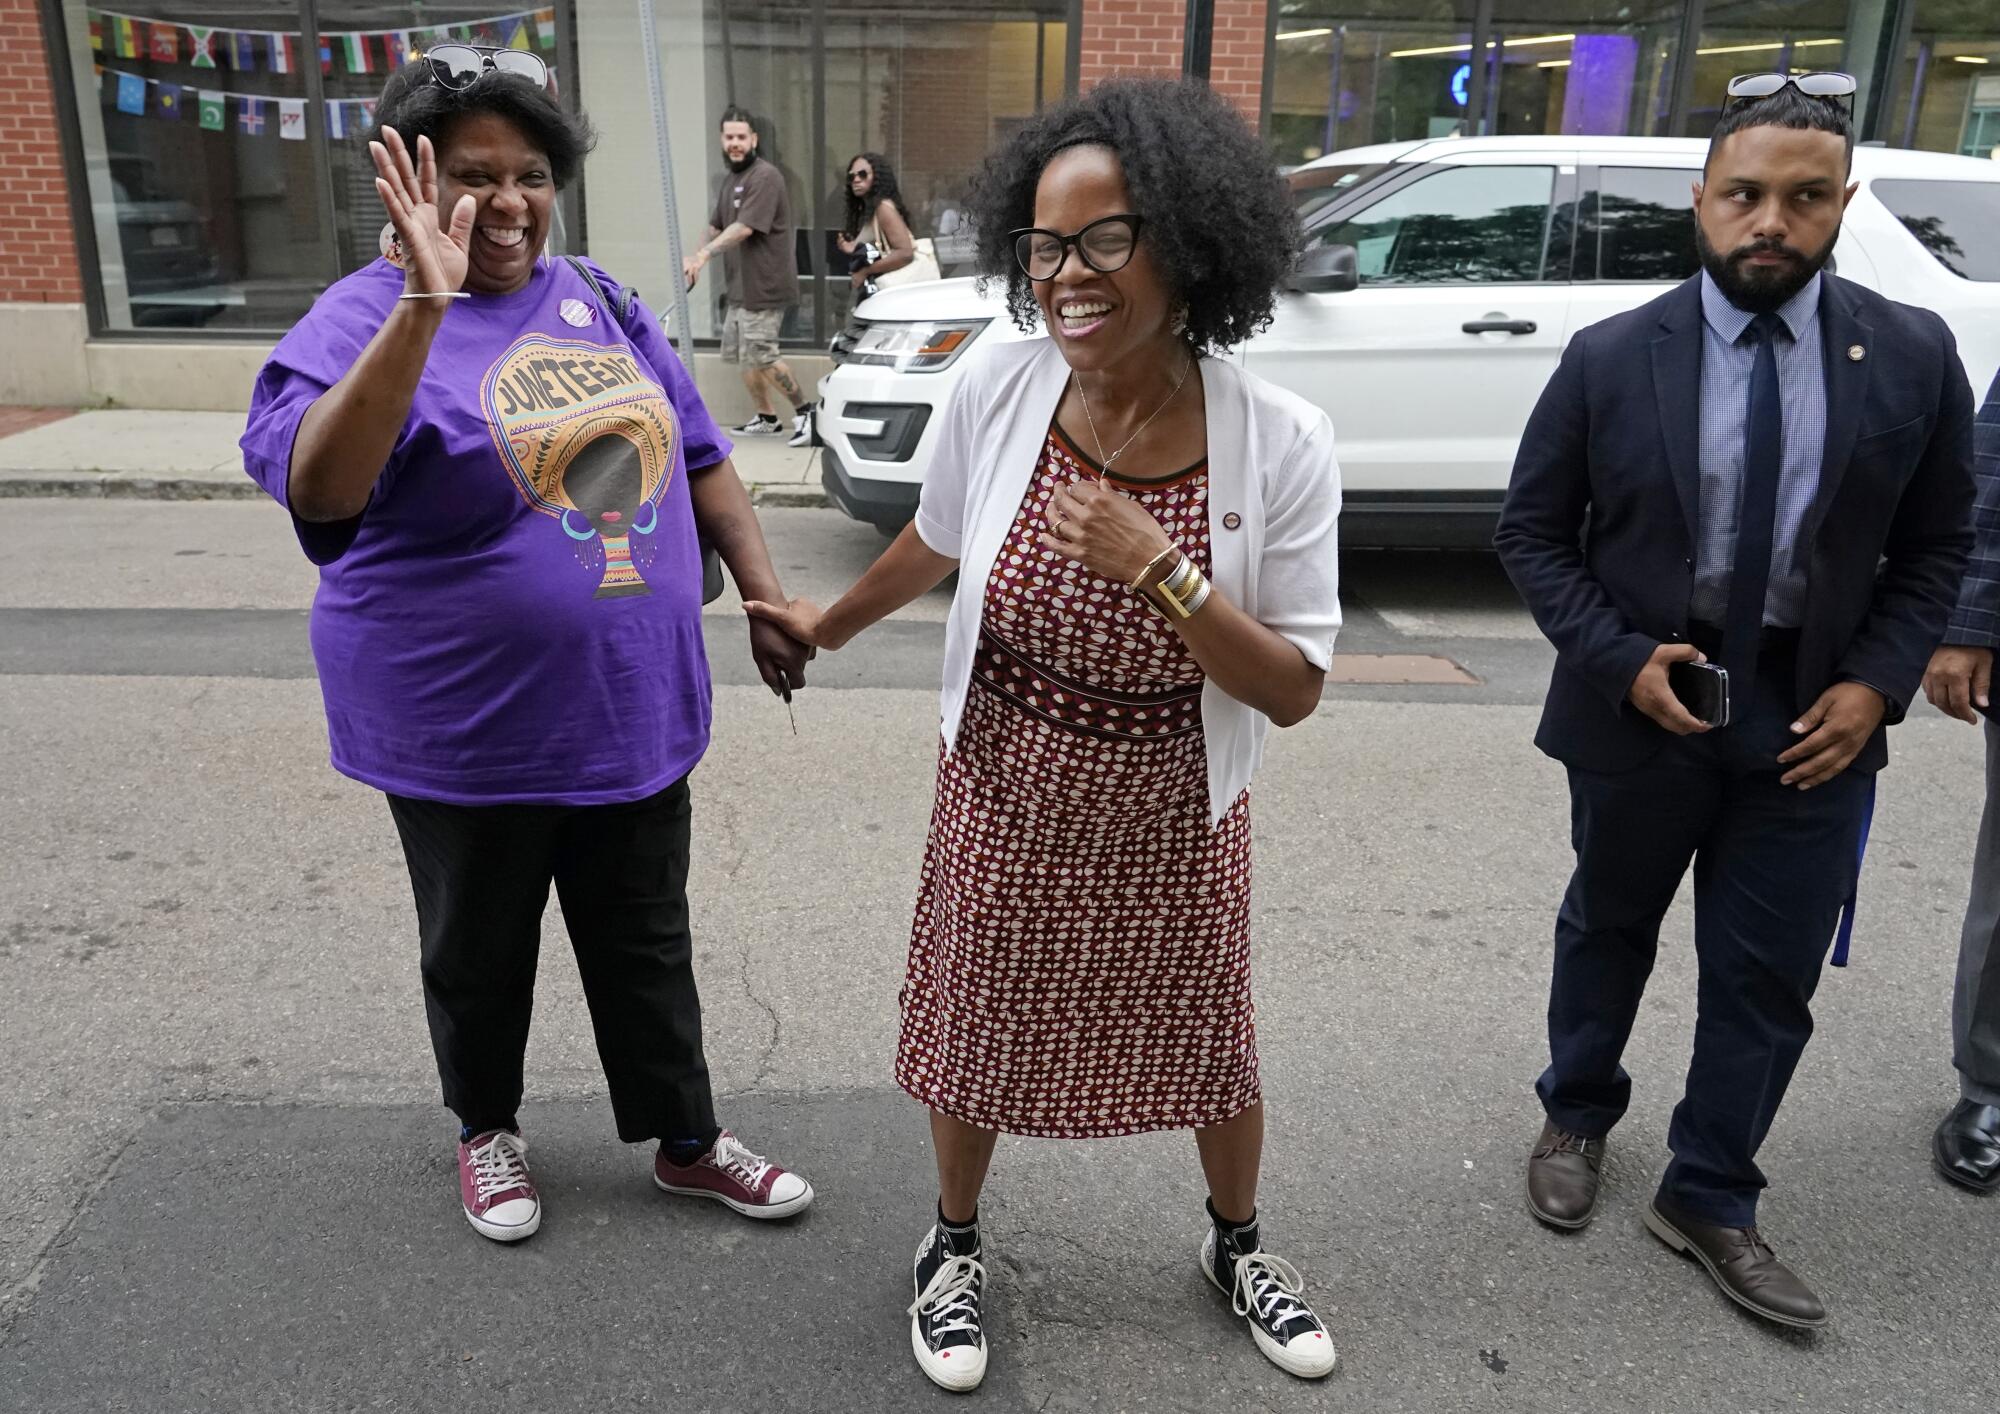 Boston's acting Mayor Kim Janey, center, meets with attendees in Boston's Nubian Square during a Juneteenth event.